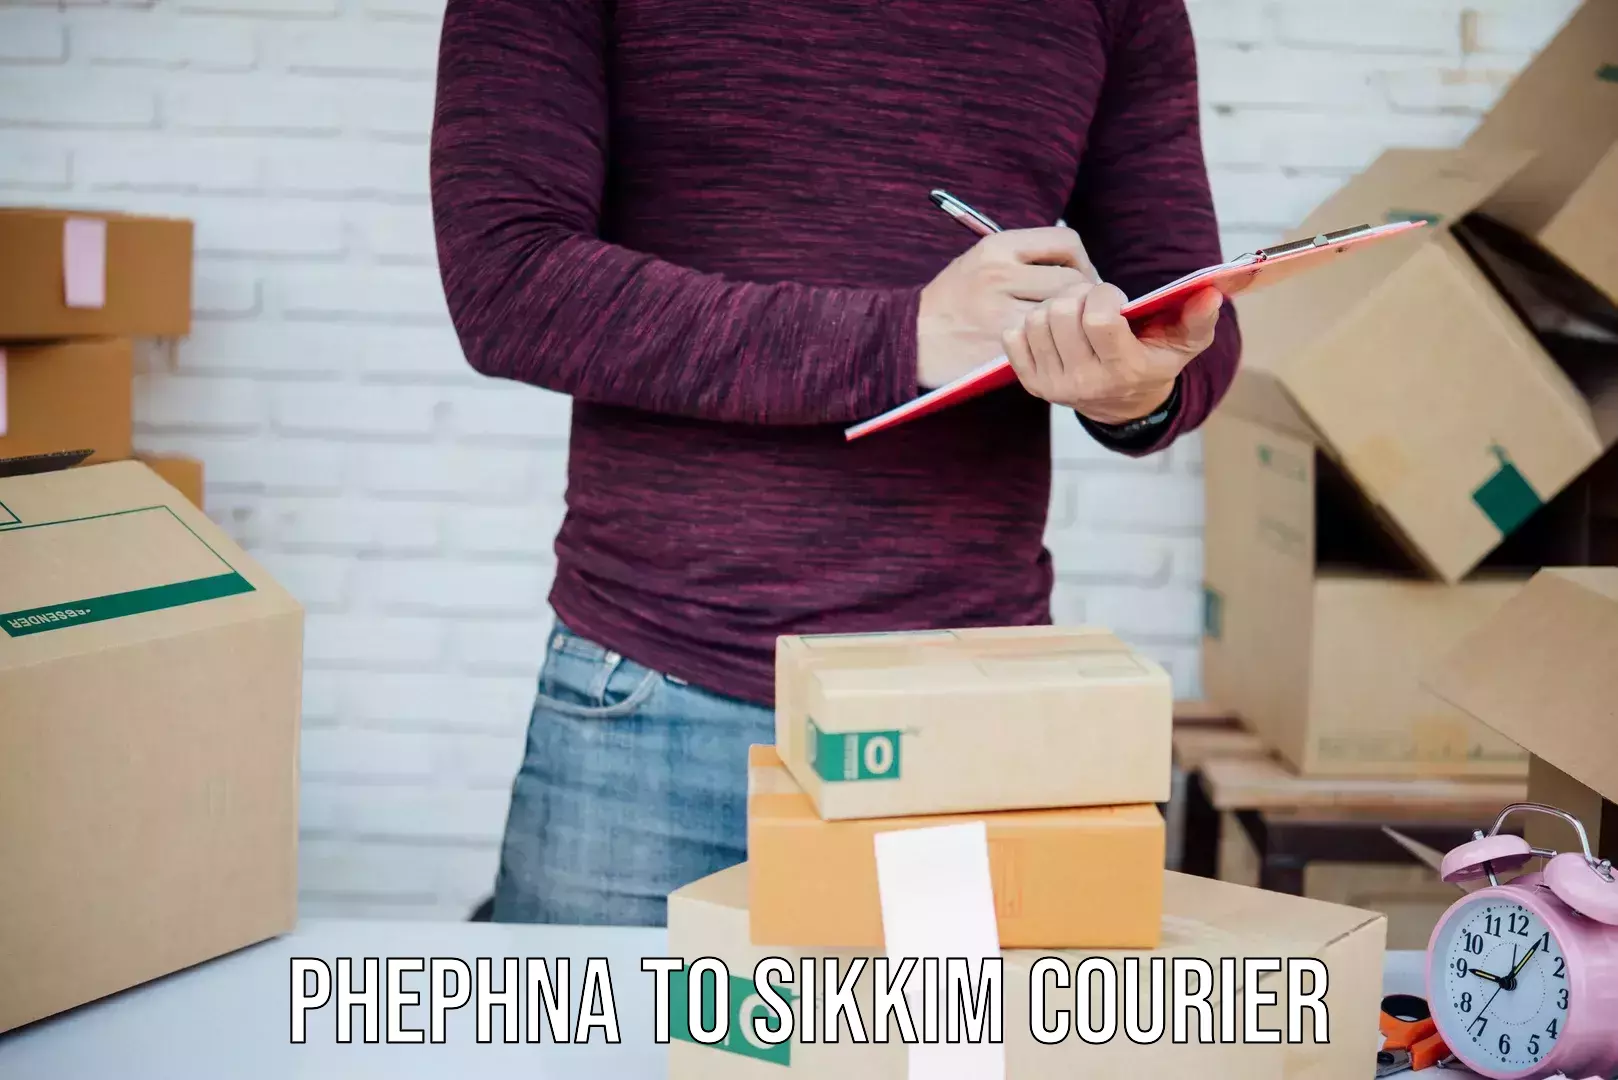 Global shipping solutions Phephna to North Sikkim